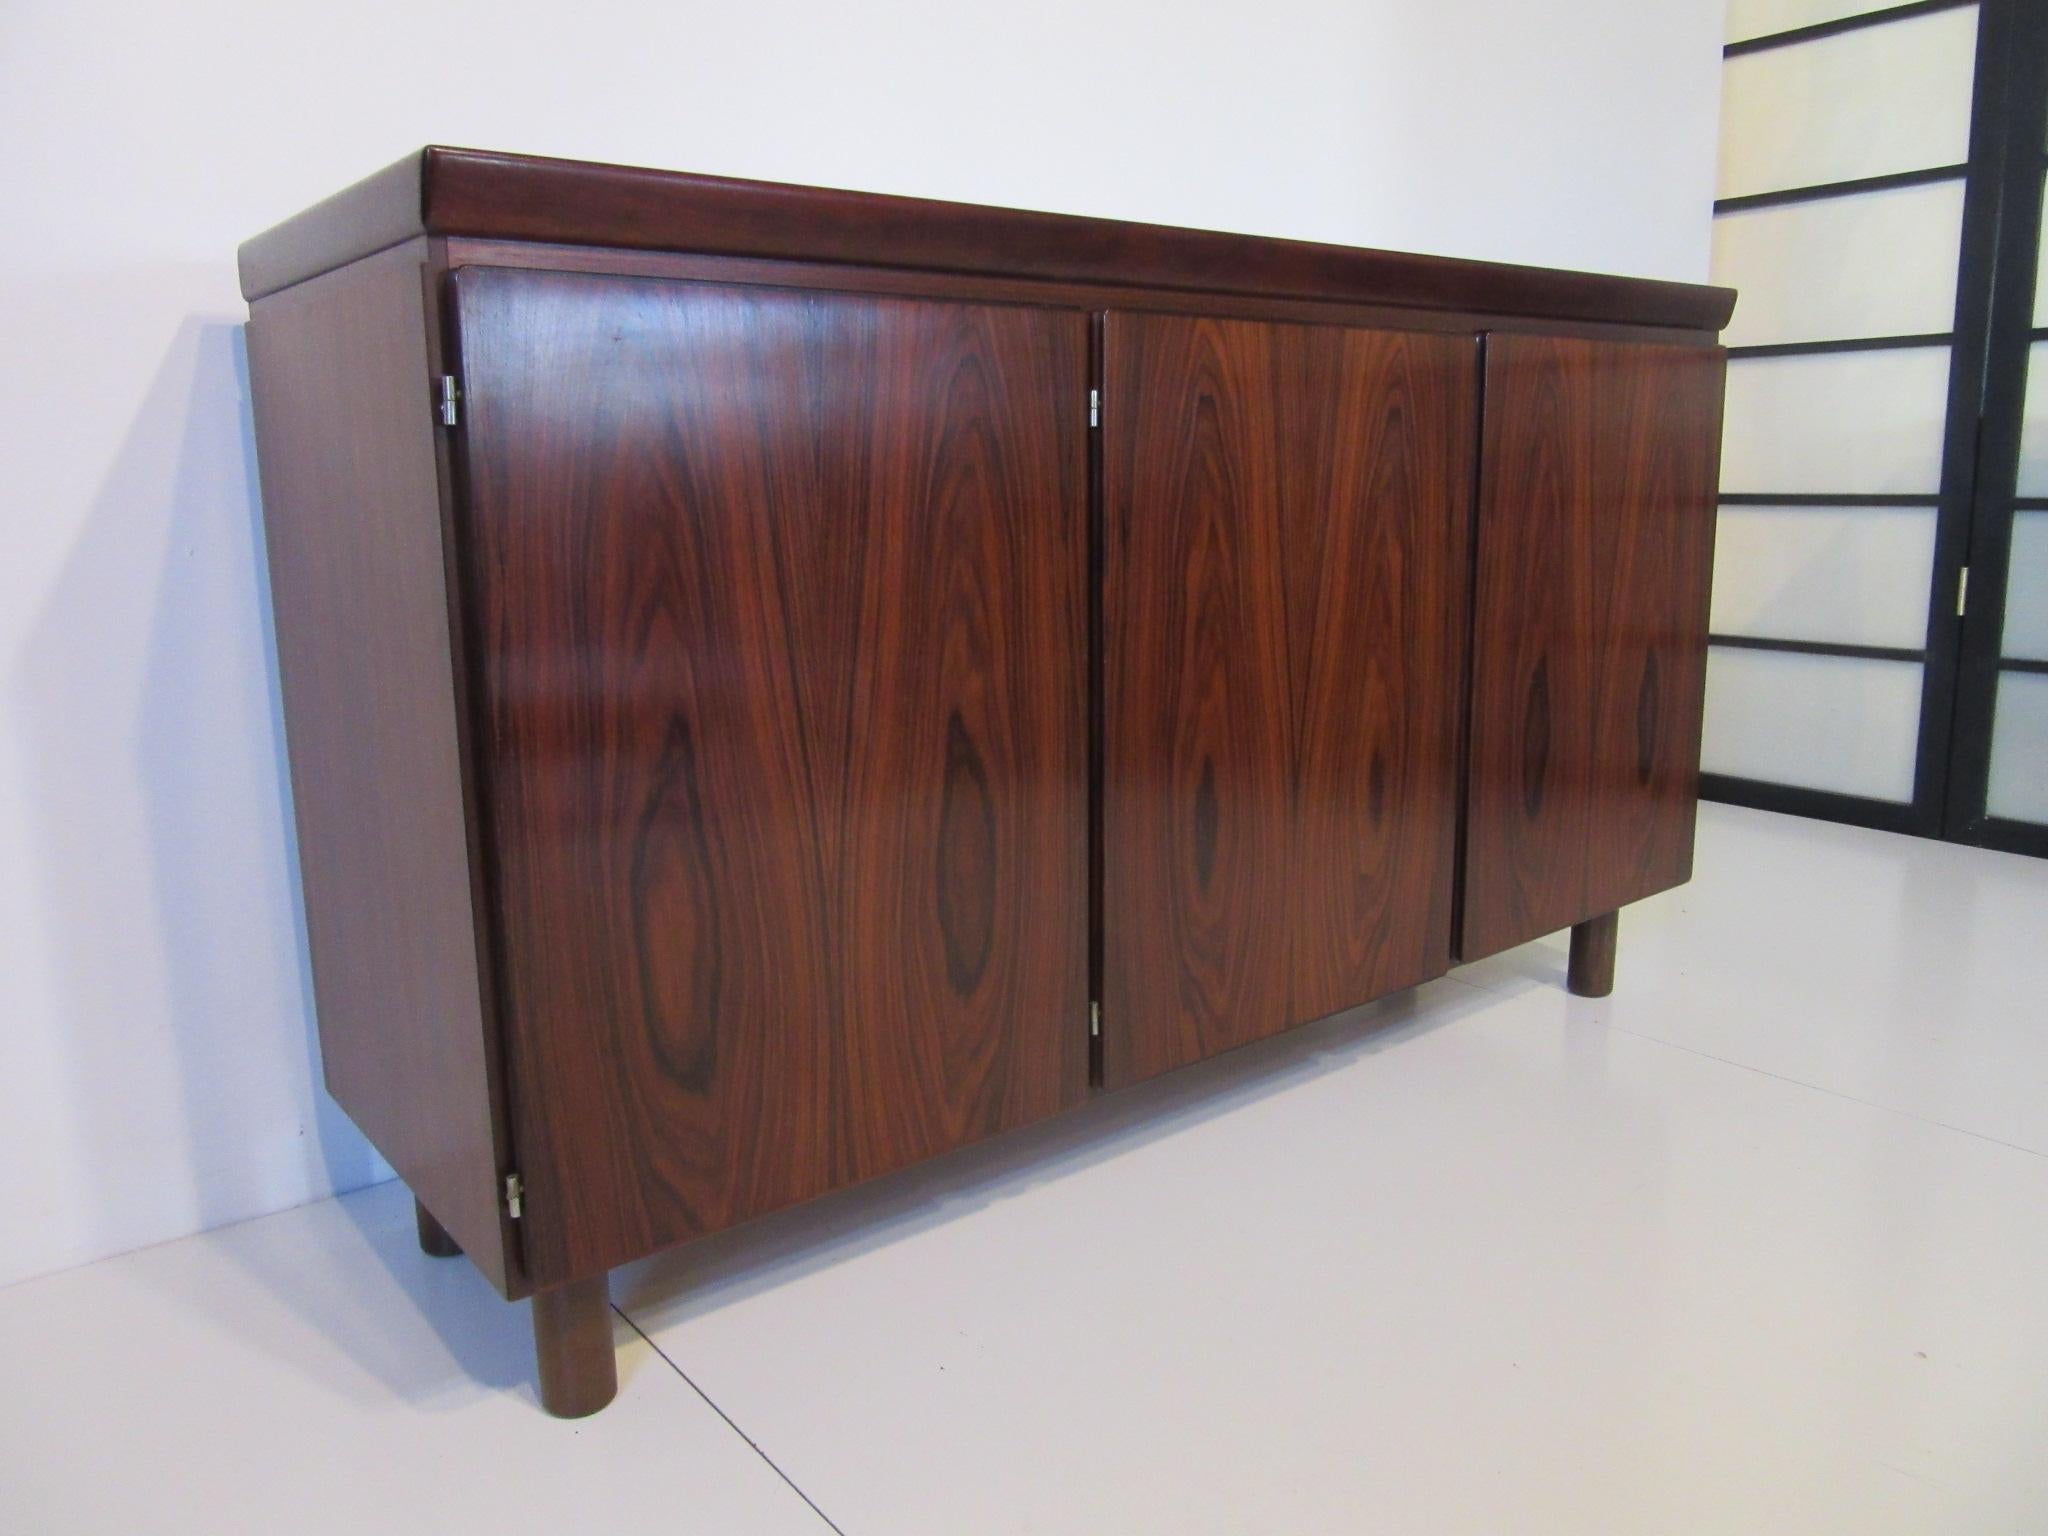 A dark and richly toned Brazilian rosewood credenza or server with five smaller drawers behind the first door and one adjustable shelve behind the other two doors. Well crafted and retaining the makers tag to the back Skovby Mobelfabrik A/S Denmark